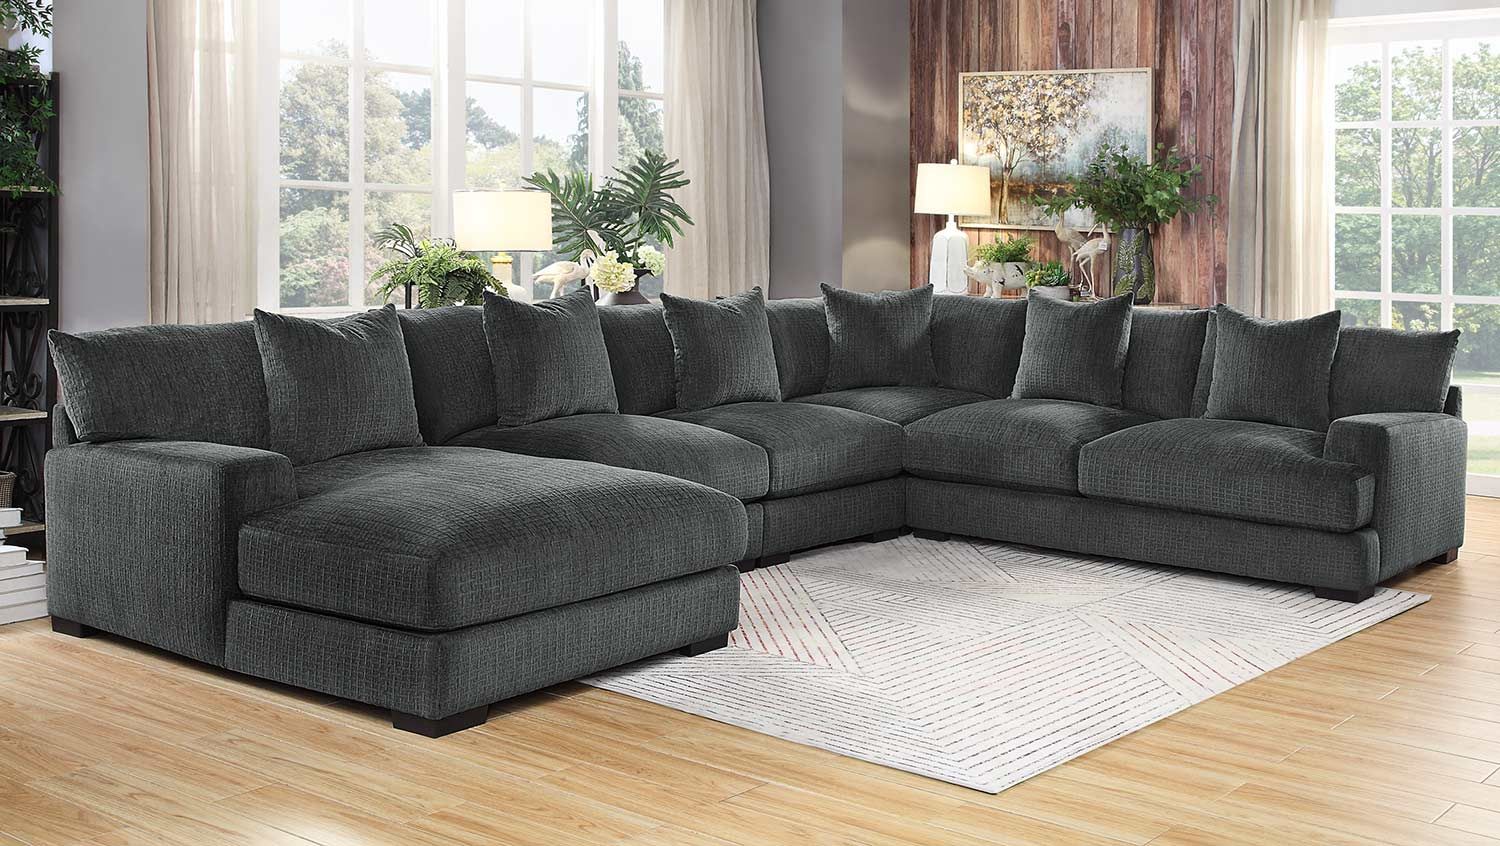 Featured Photo of 15 Collection of Dark Gray Sectional Sofas